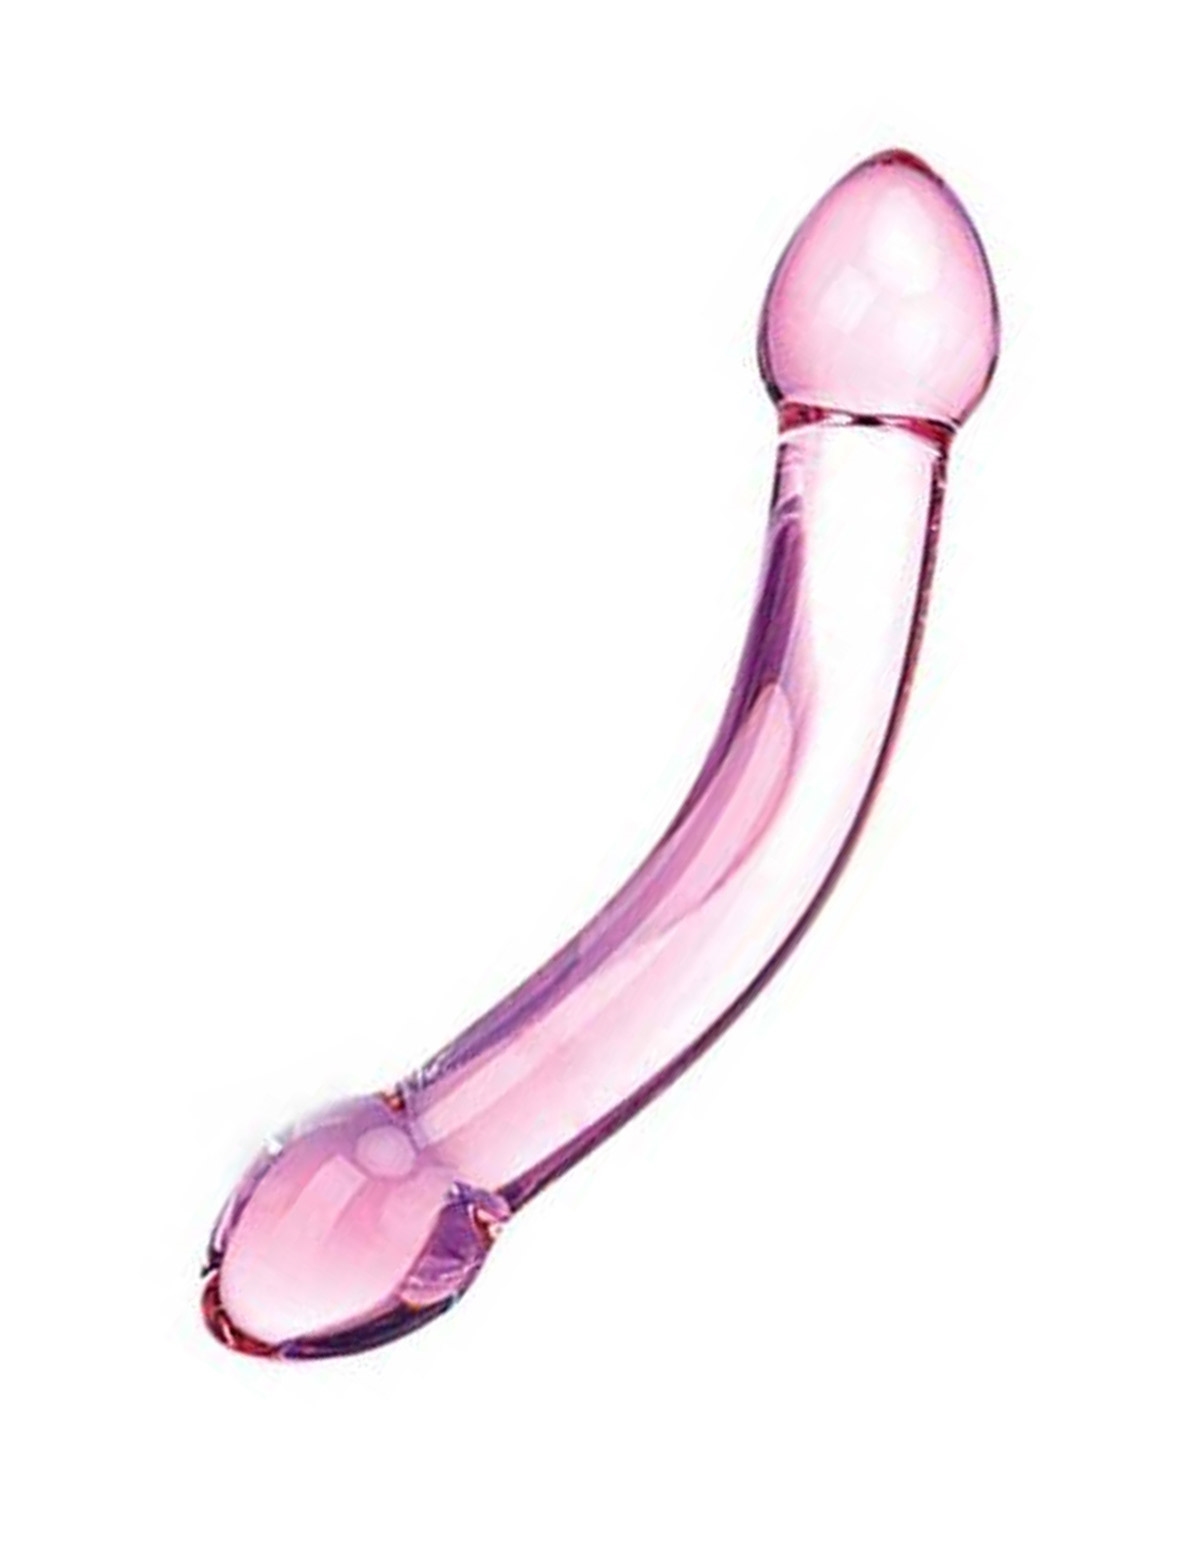 alternate image for Double Trouble Glass Dildo